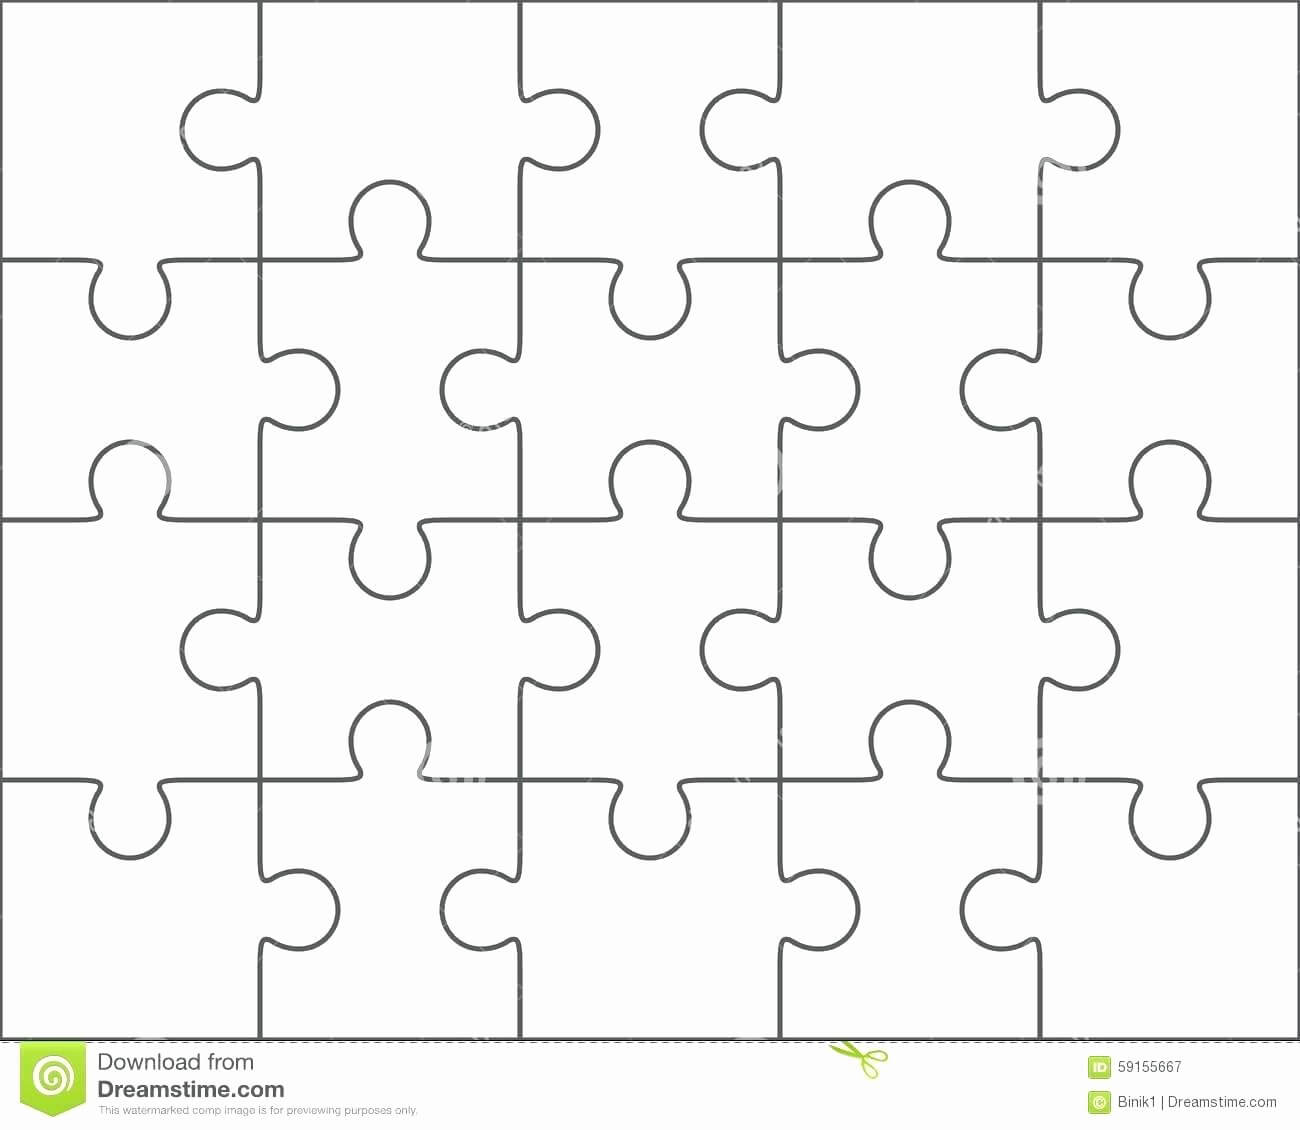 030 Puzzle Pieces Template For Word Best Of Piece Intended With Regard To Blank Jigsaw Piece Template